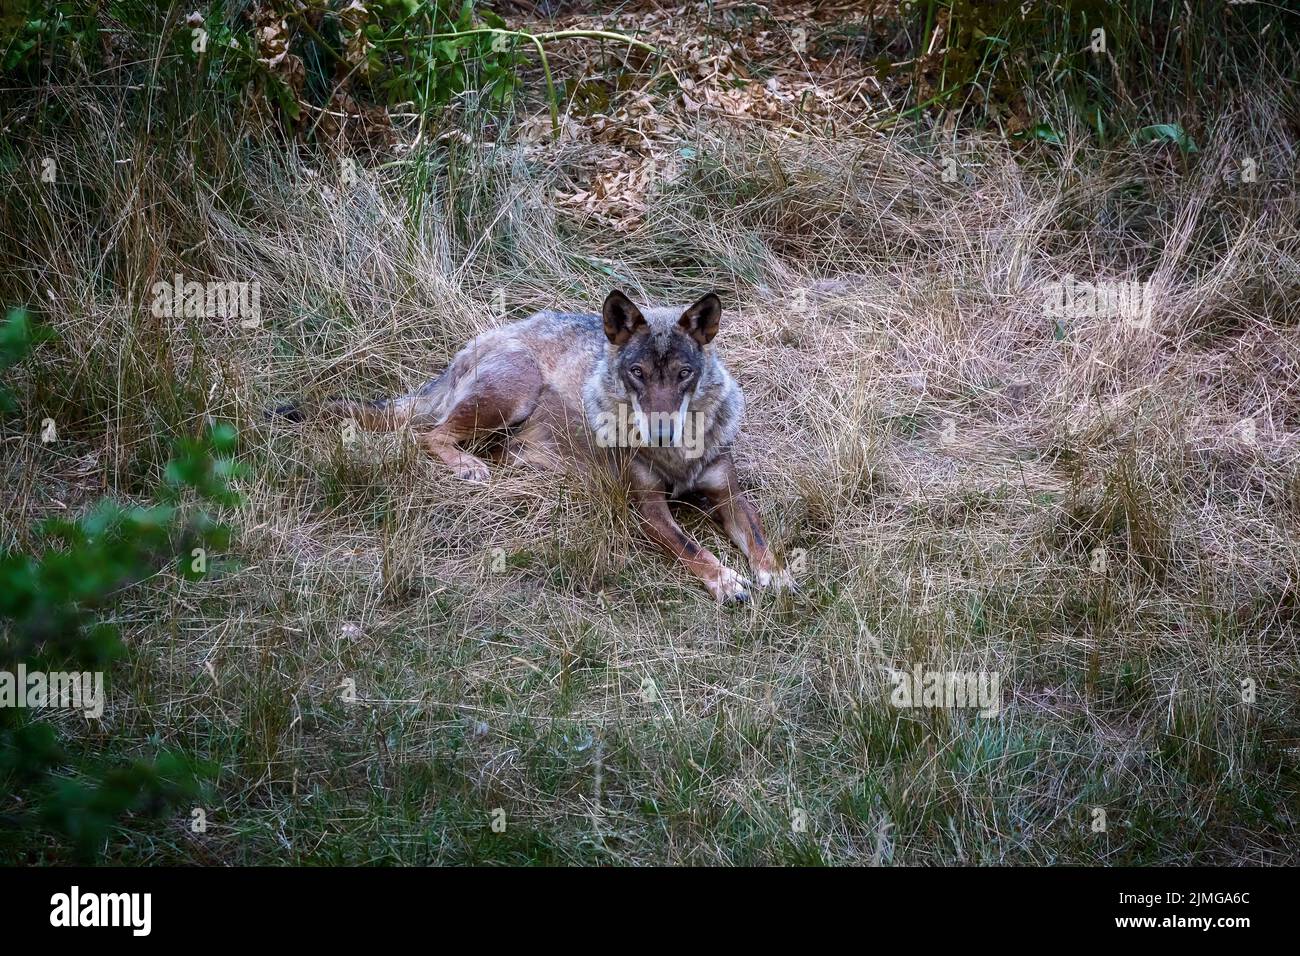 Italian wolf, Canis Lupus Italicus, unique subspecies of the indigenous gray wolf. Adult specimen taken in the forest. Stock Photo